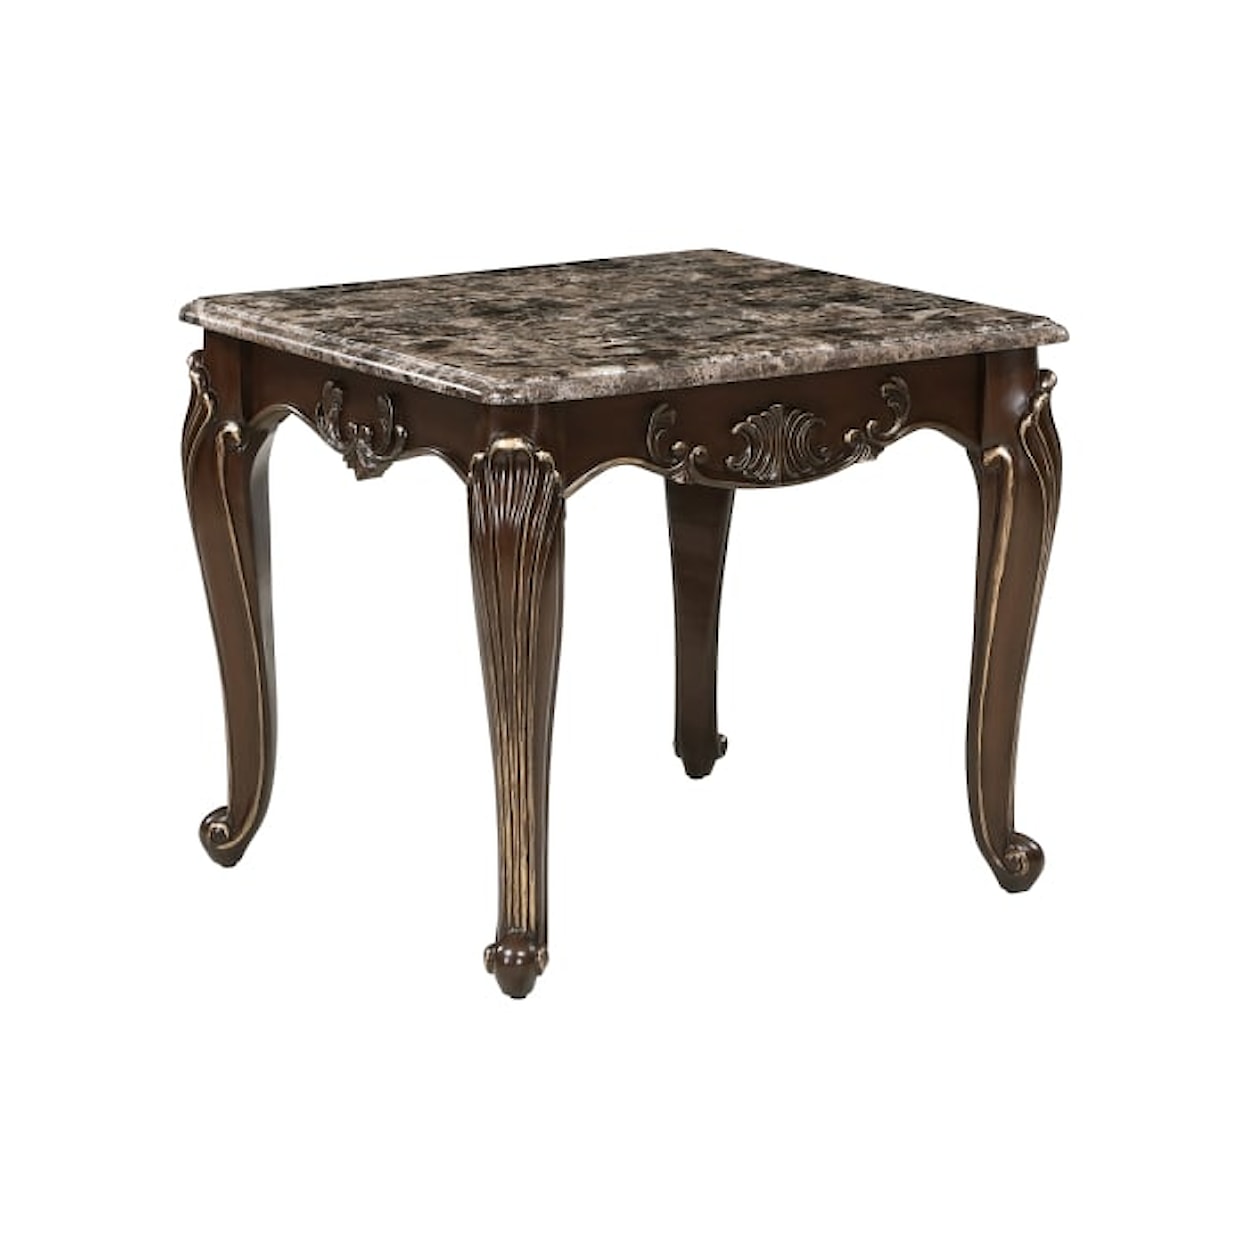 Homelegance Furniture Miscellaneous End Table